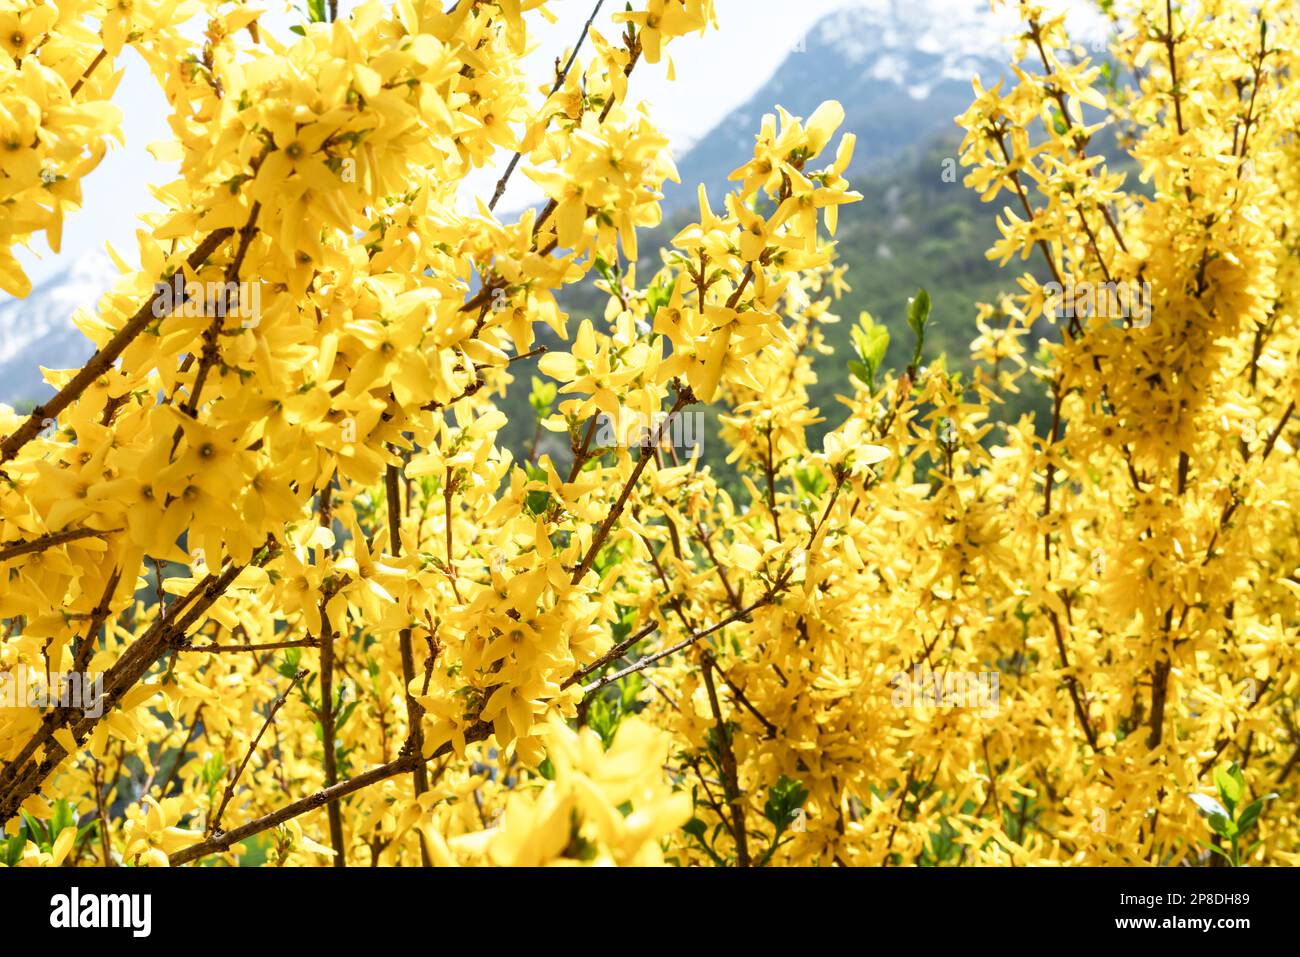 spring or summer landscape flowering plant with yellow forsythia flowers against snow capped mountain peaks and blue sky beauty in nature landscaping Stock Photo